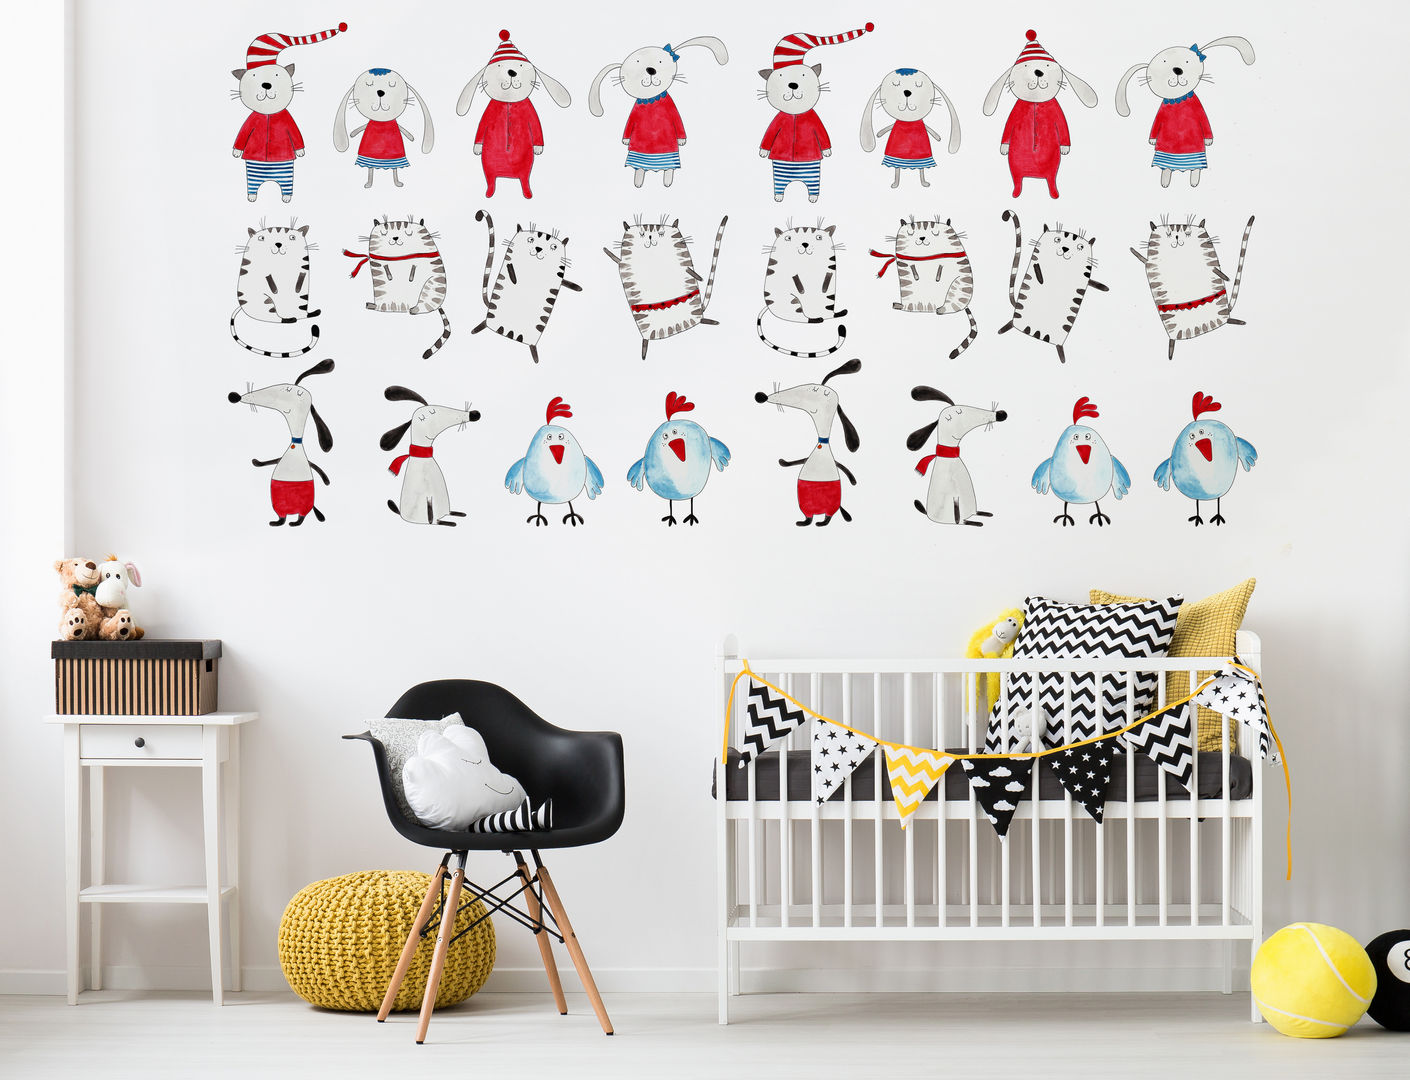 Nursery design ideas to earn you cool parent points! | homify